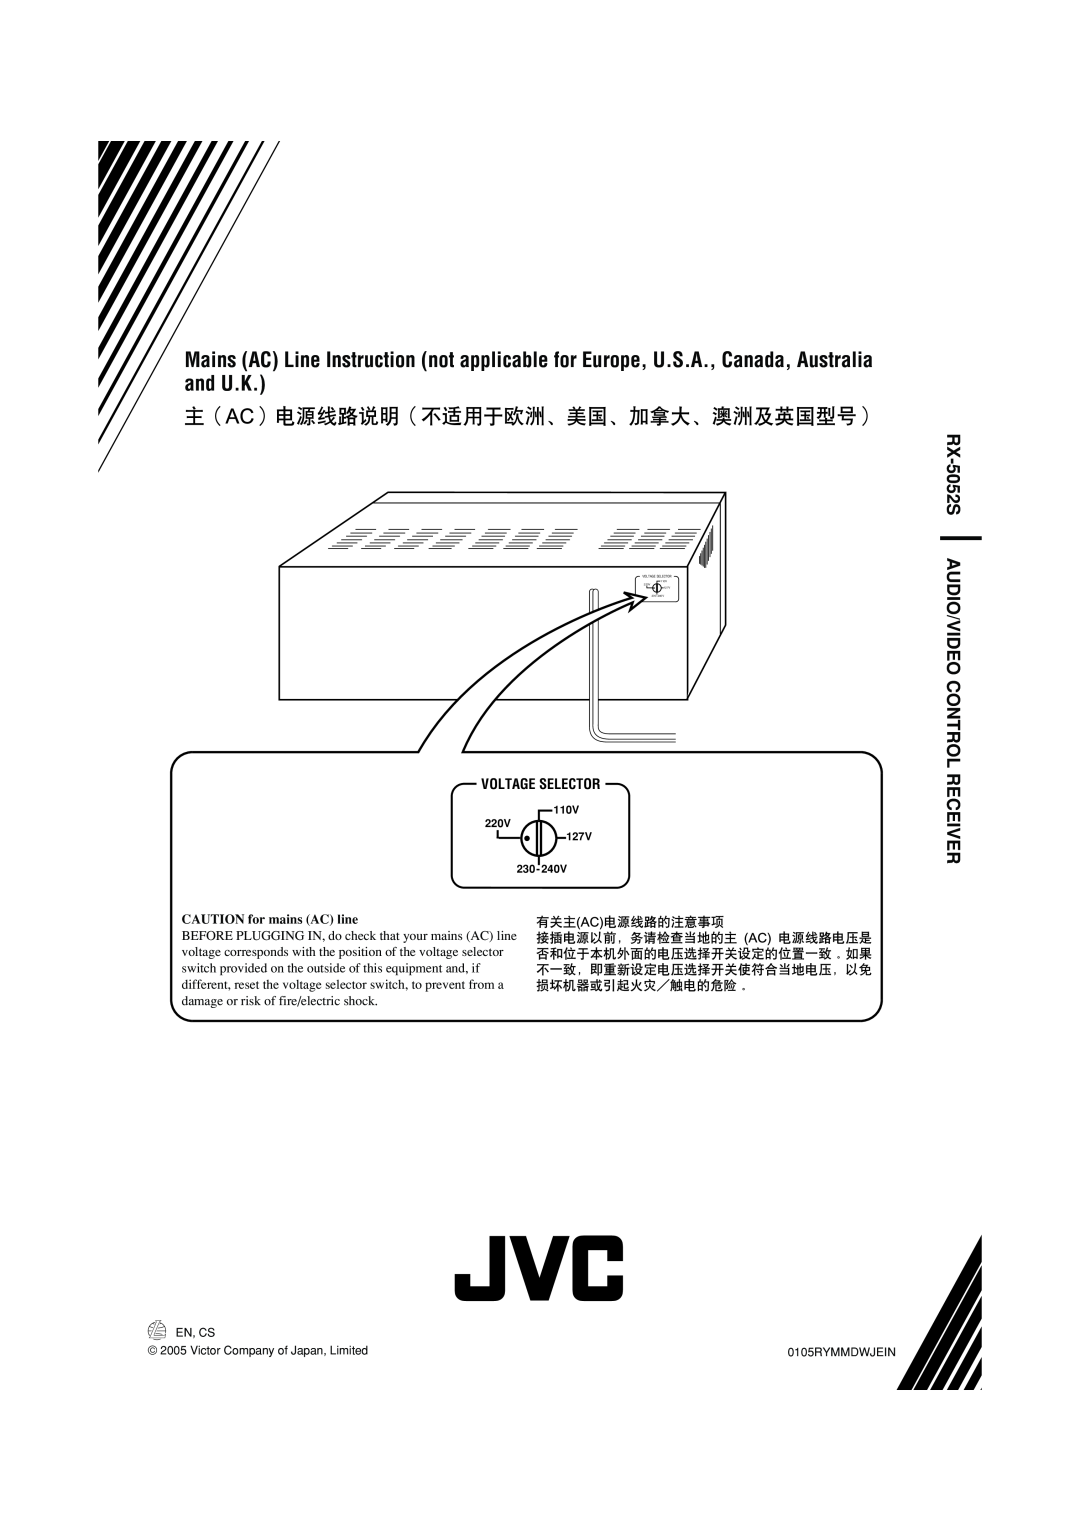 JVC LVT1290-007A, 0105RYMMDWJEIN manual RX-5052S, Audio/Video Control Receiver, Voltage Selector, CAUTION for mains AC line 